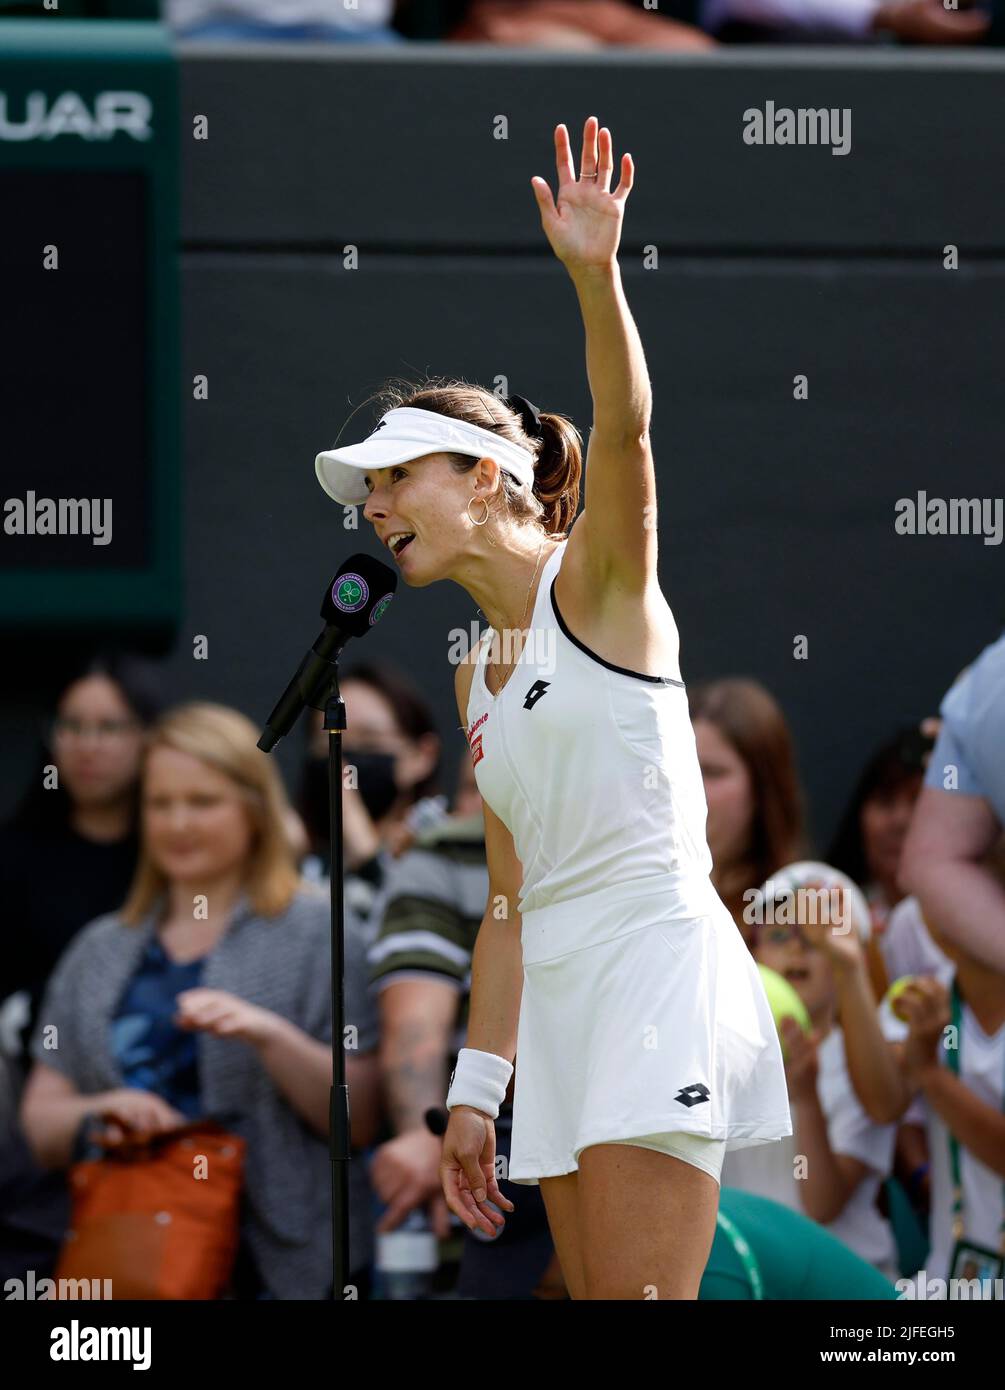 Alize Cornet waves to the crowd after winning her Ladies' Singles third round match against Iga Swiatek during day six of the 2022 Wimbledon Championships at the All England Lawn Tennis and Croquet Club, Wimbledon. Picture date: Saturday July 2, 2022. Stock Photo